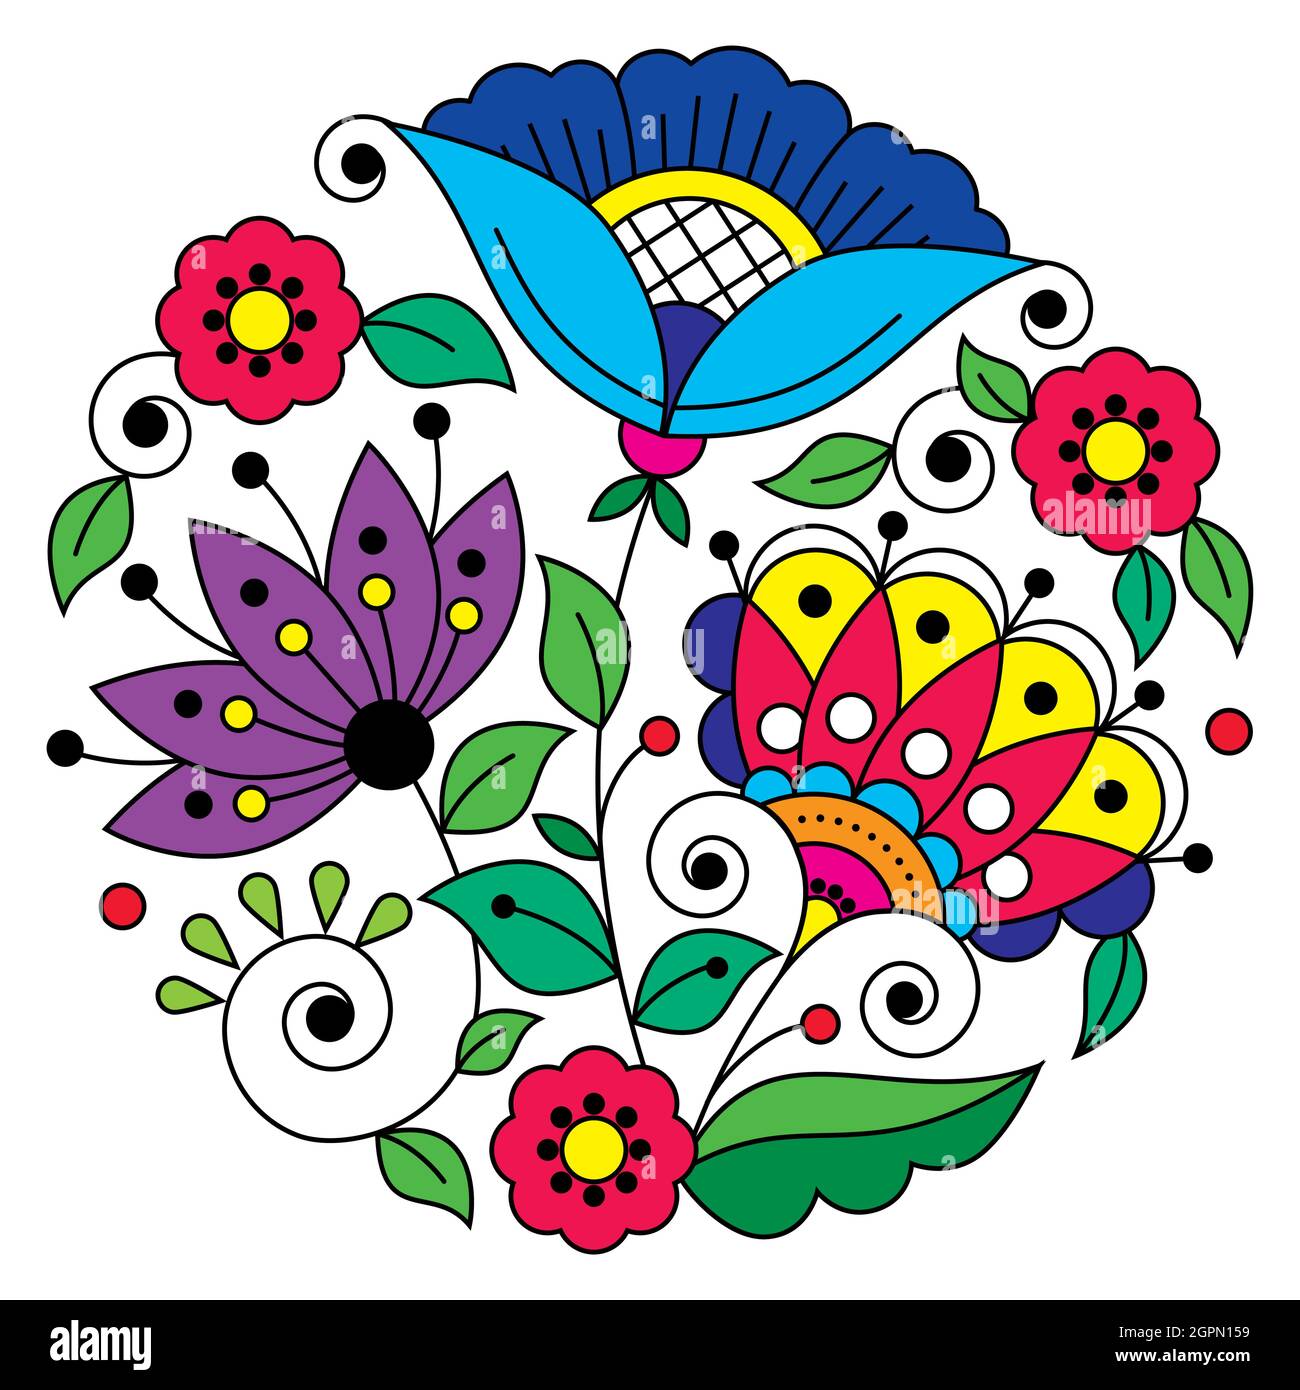 Swedish folk art vector mandala design pattern with flowers, leaves and swirls inspired by the traditional embroidery from Scandinavia Stock Vector